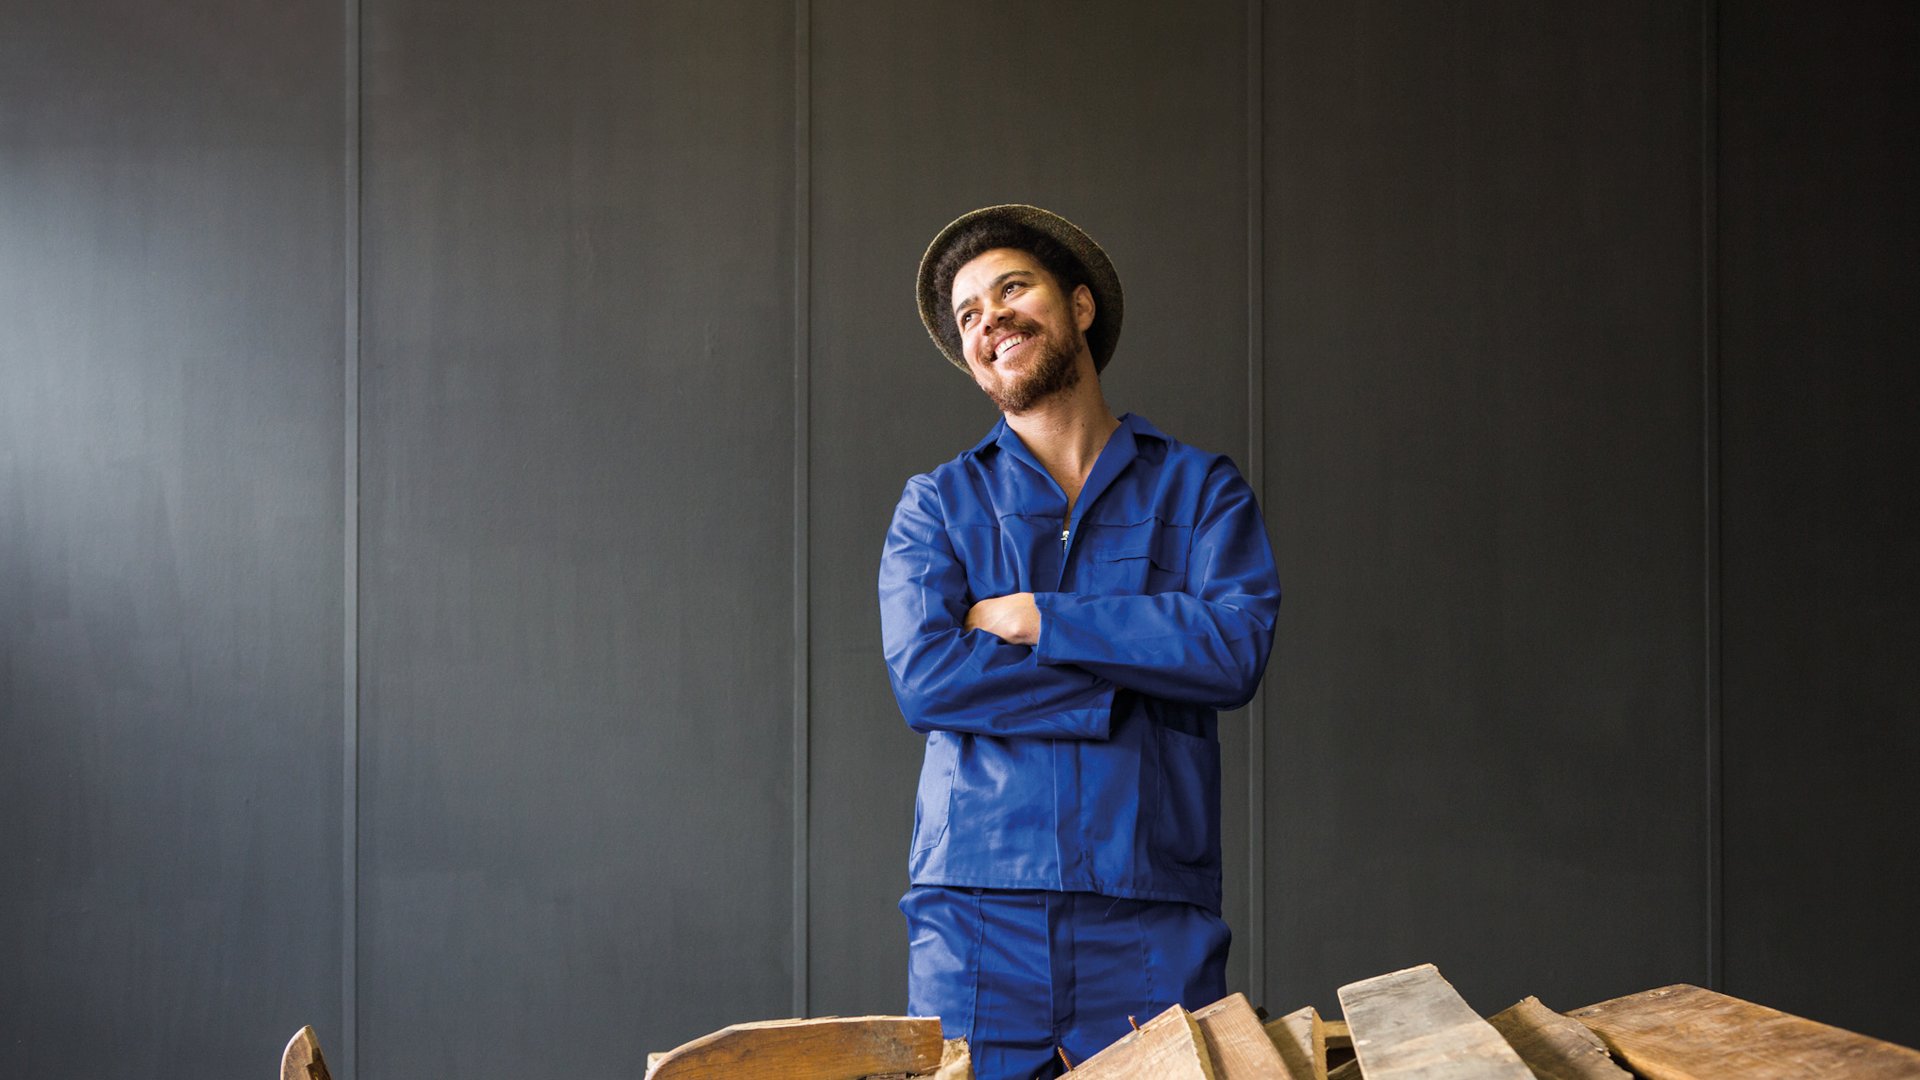 South African artist Kemang Wa Lehulere stands smiling, wearing a blue suit and a brown hat.